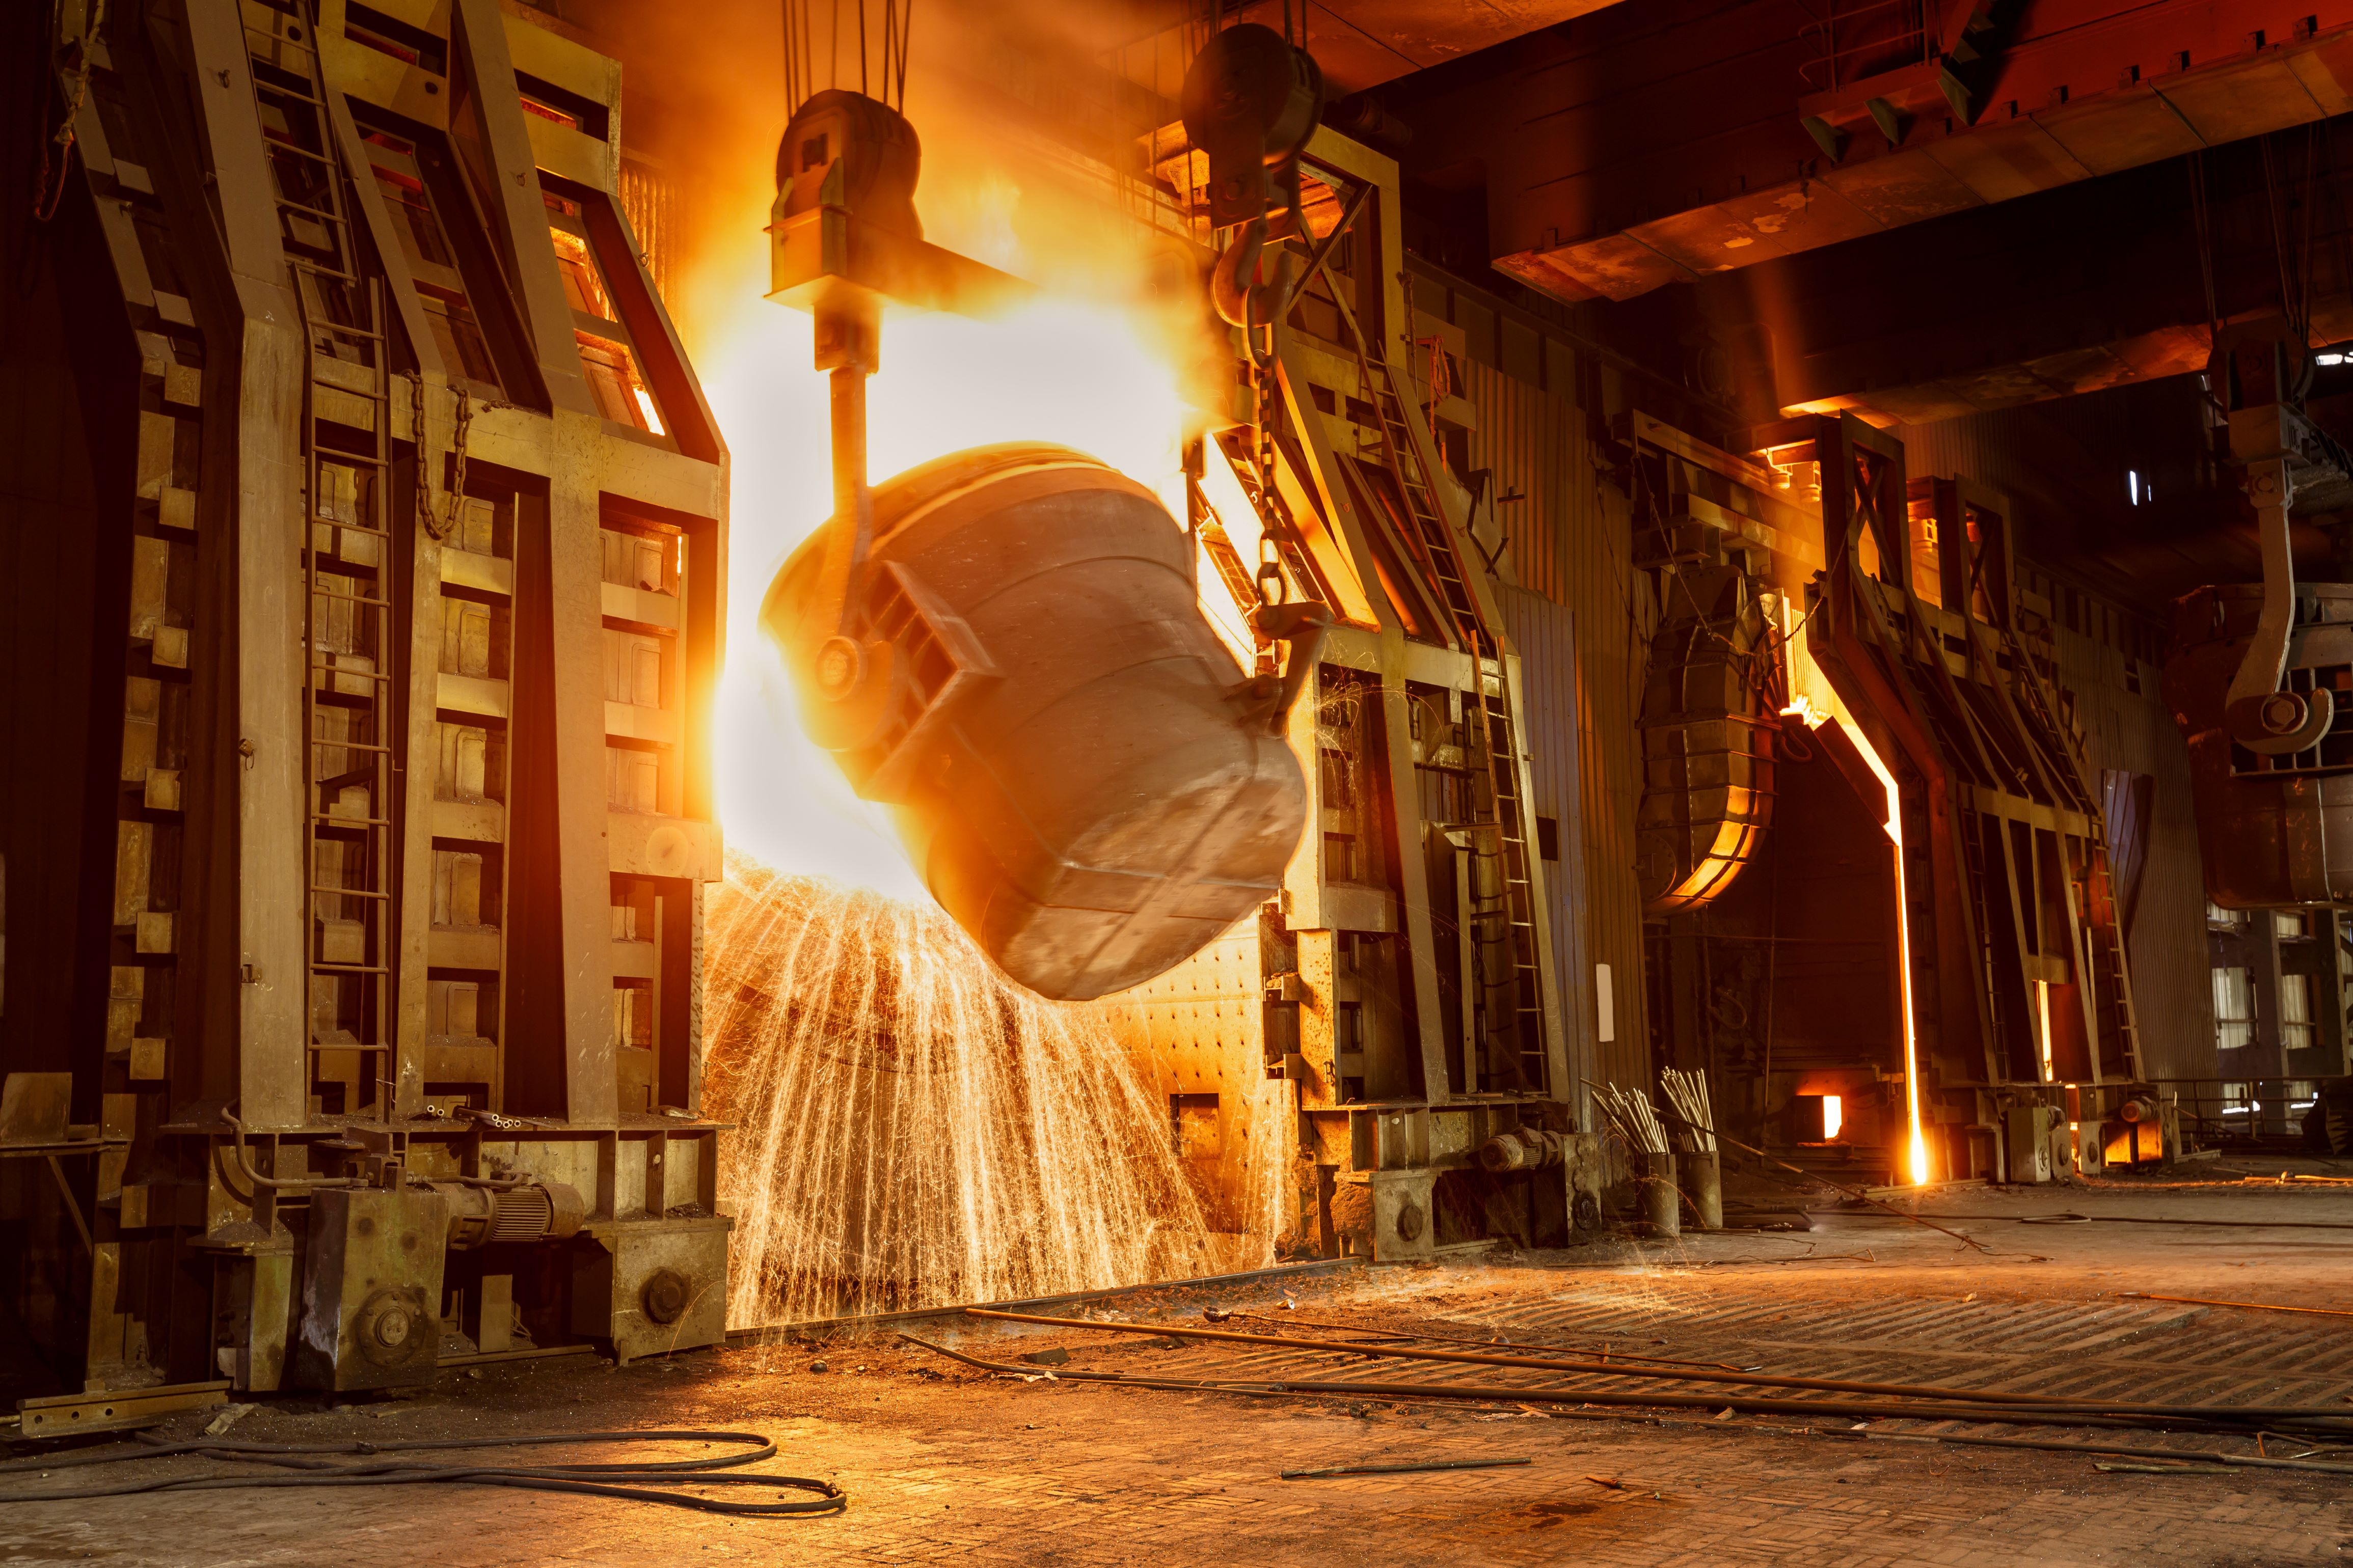 Steel furnace at work in a foundry